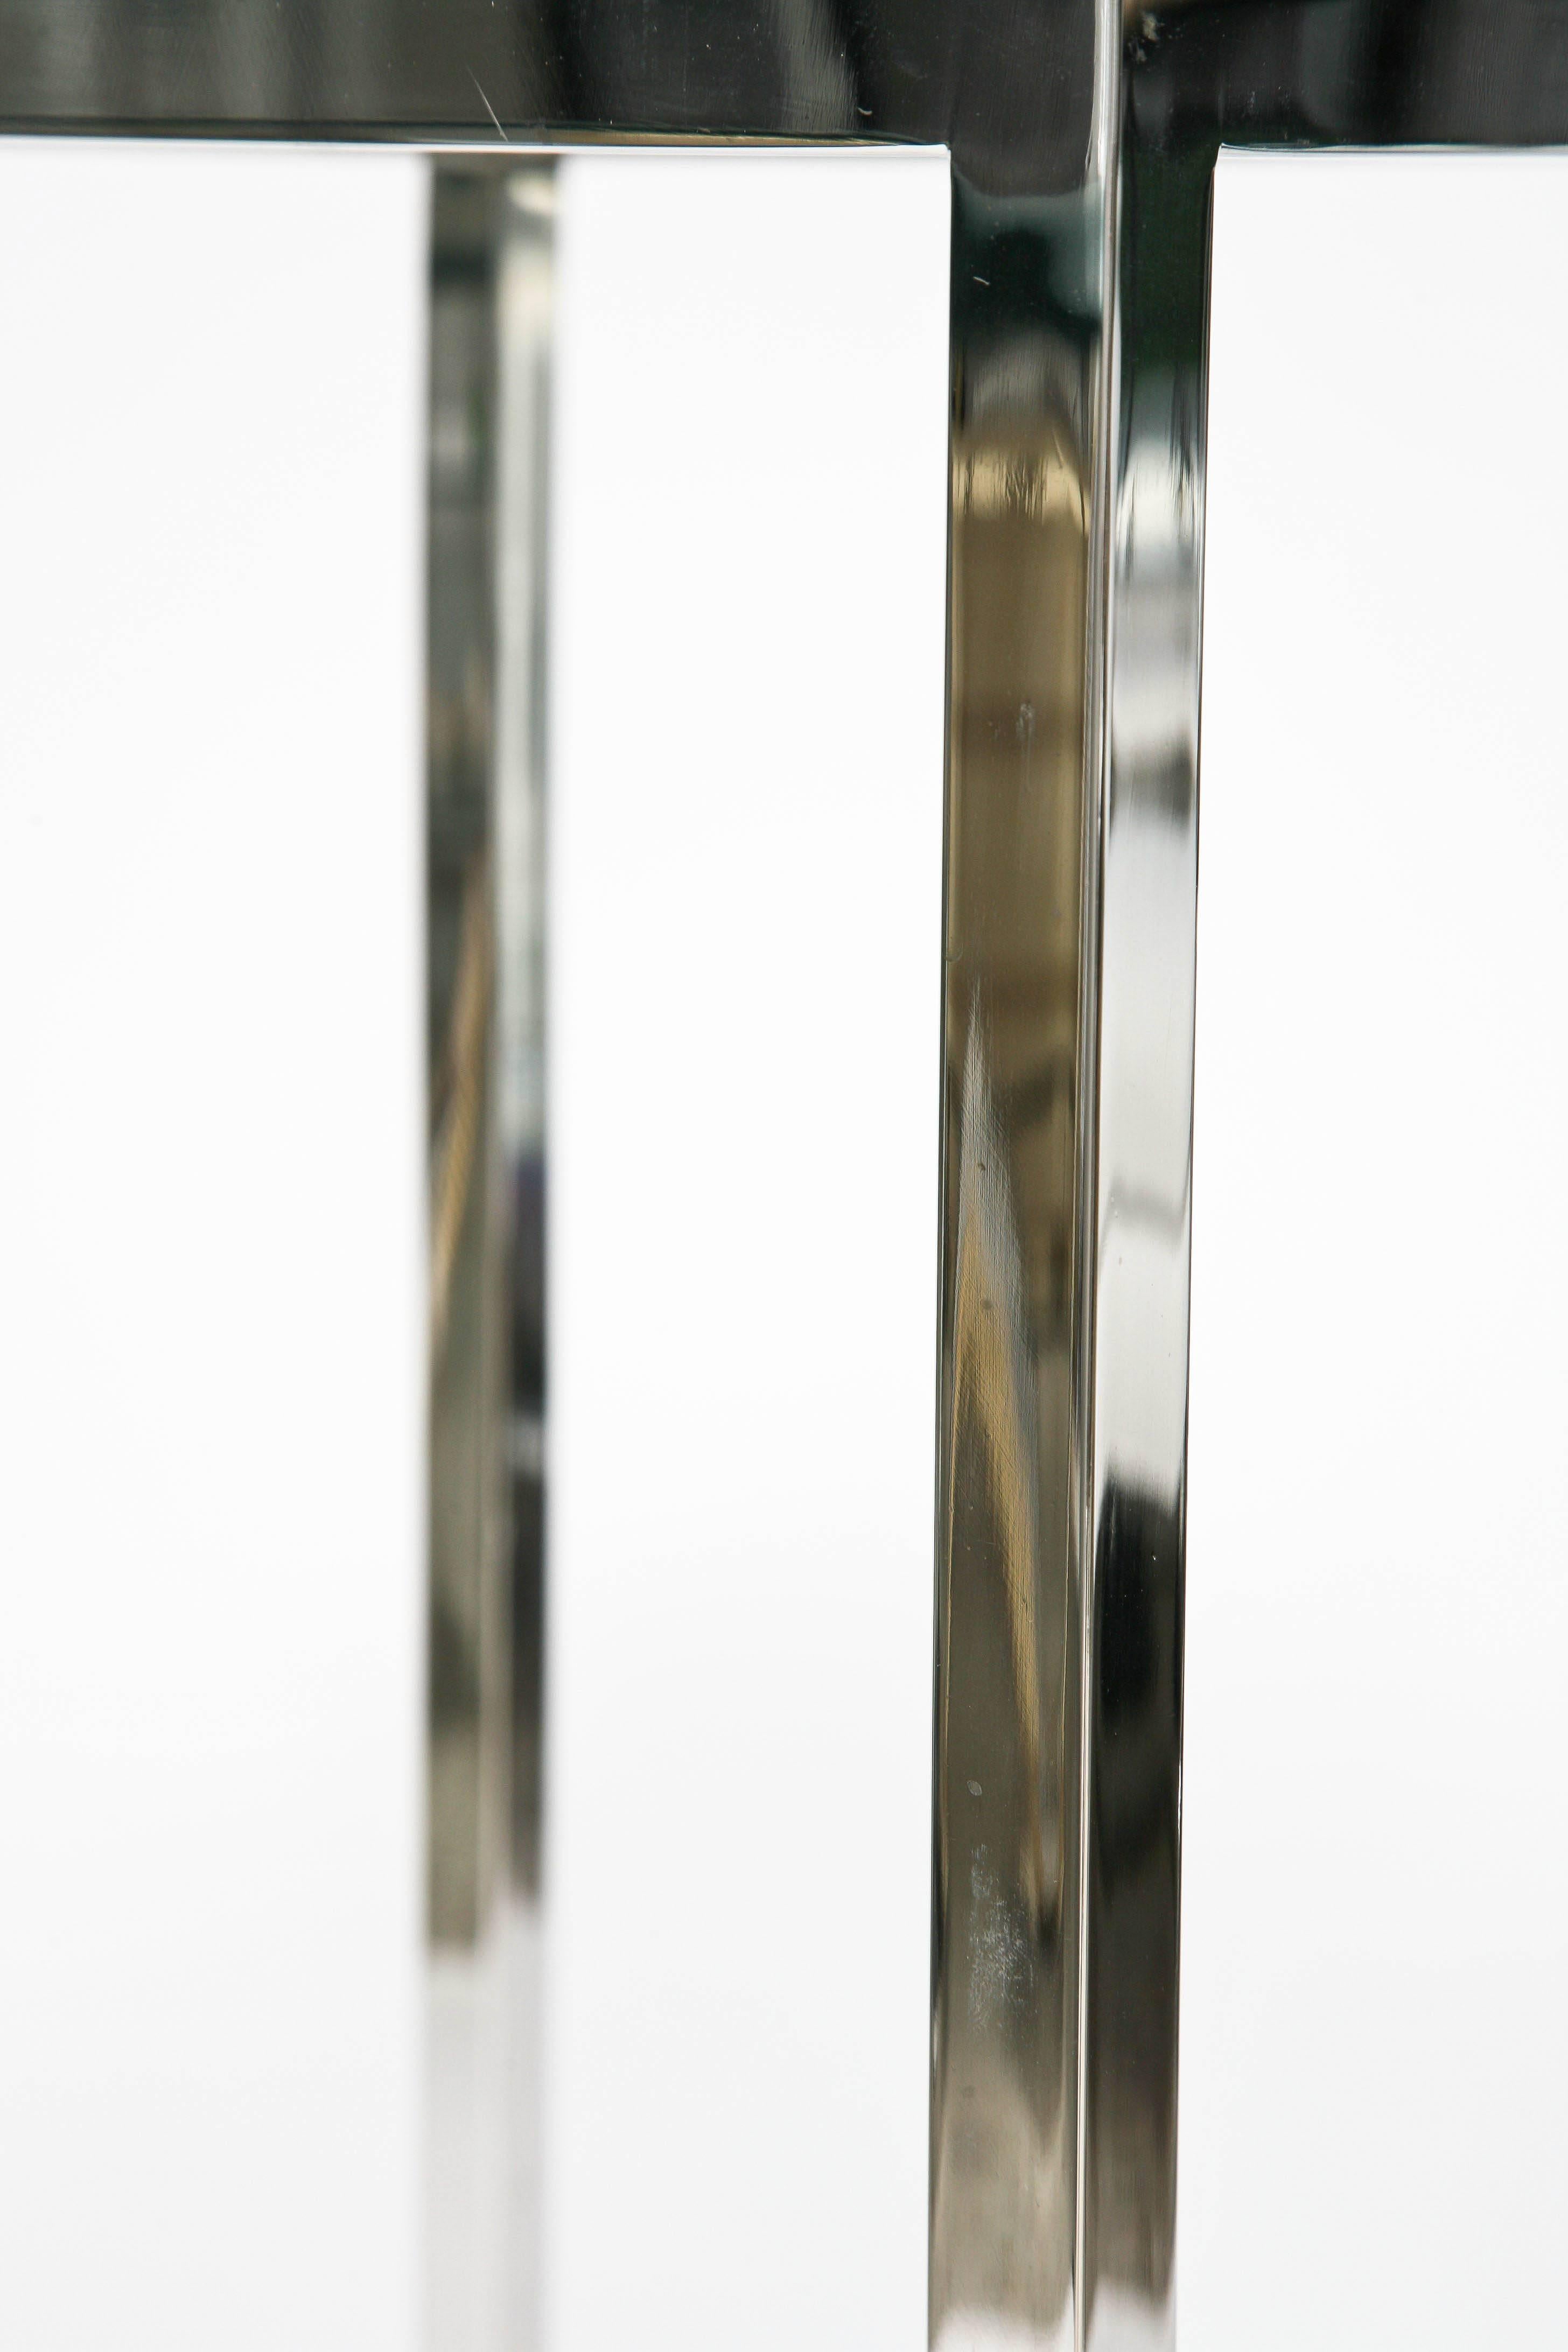 American Polished Chrome and Glass Square Pedestal, Thin-Line by Milo Baughman